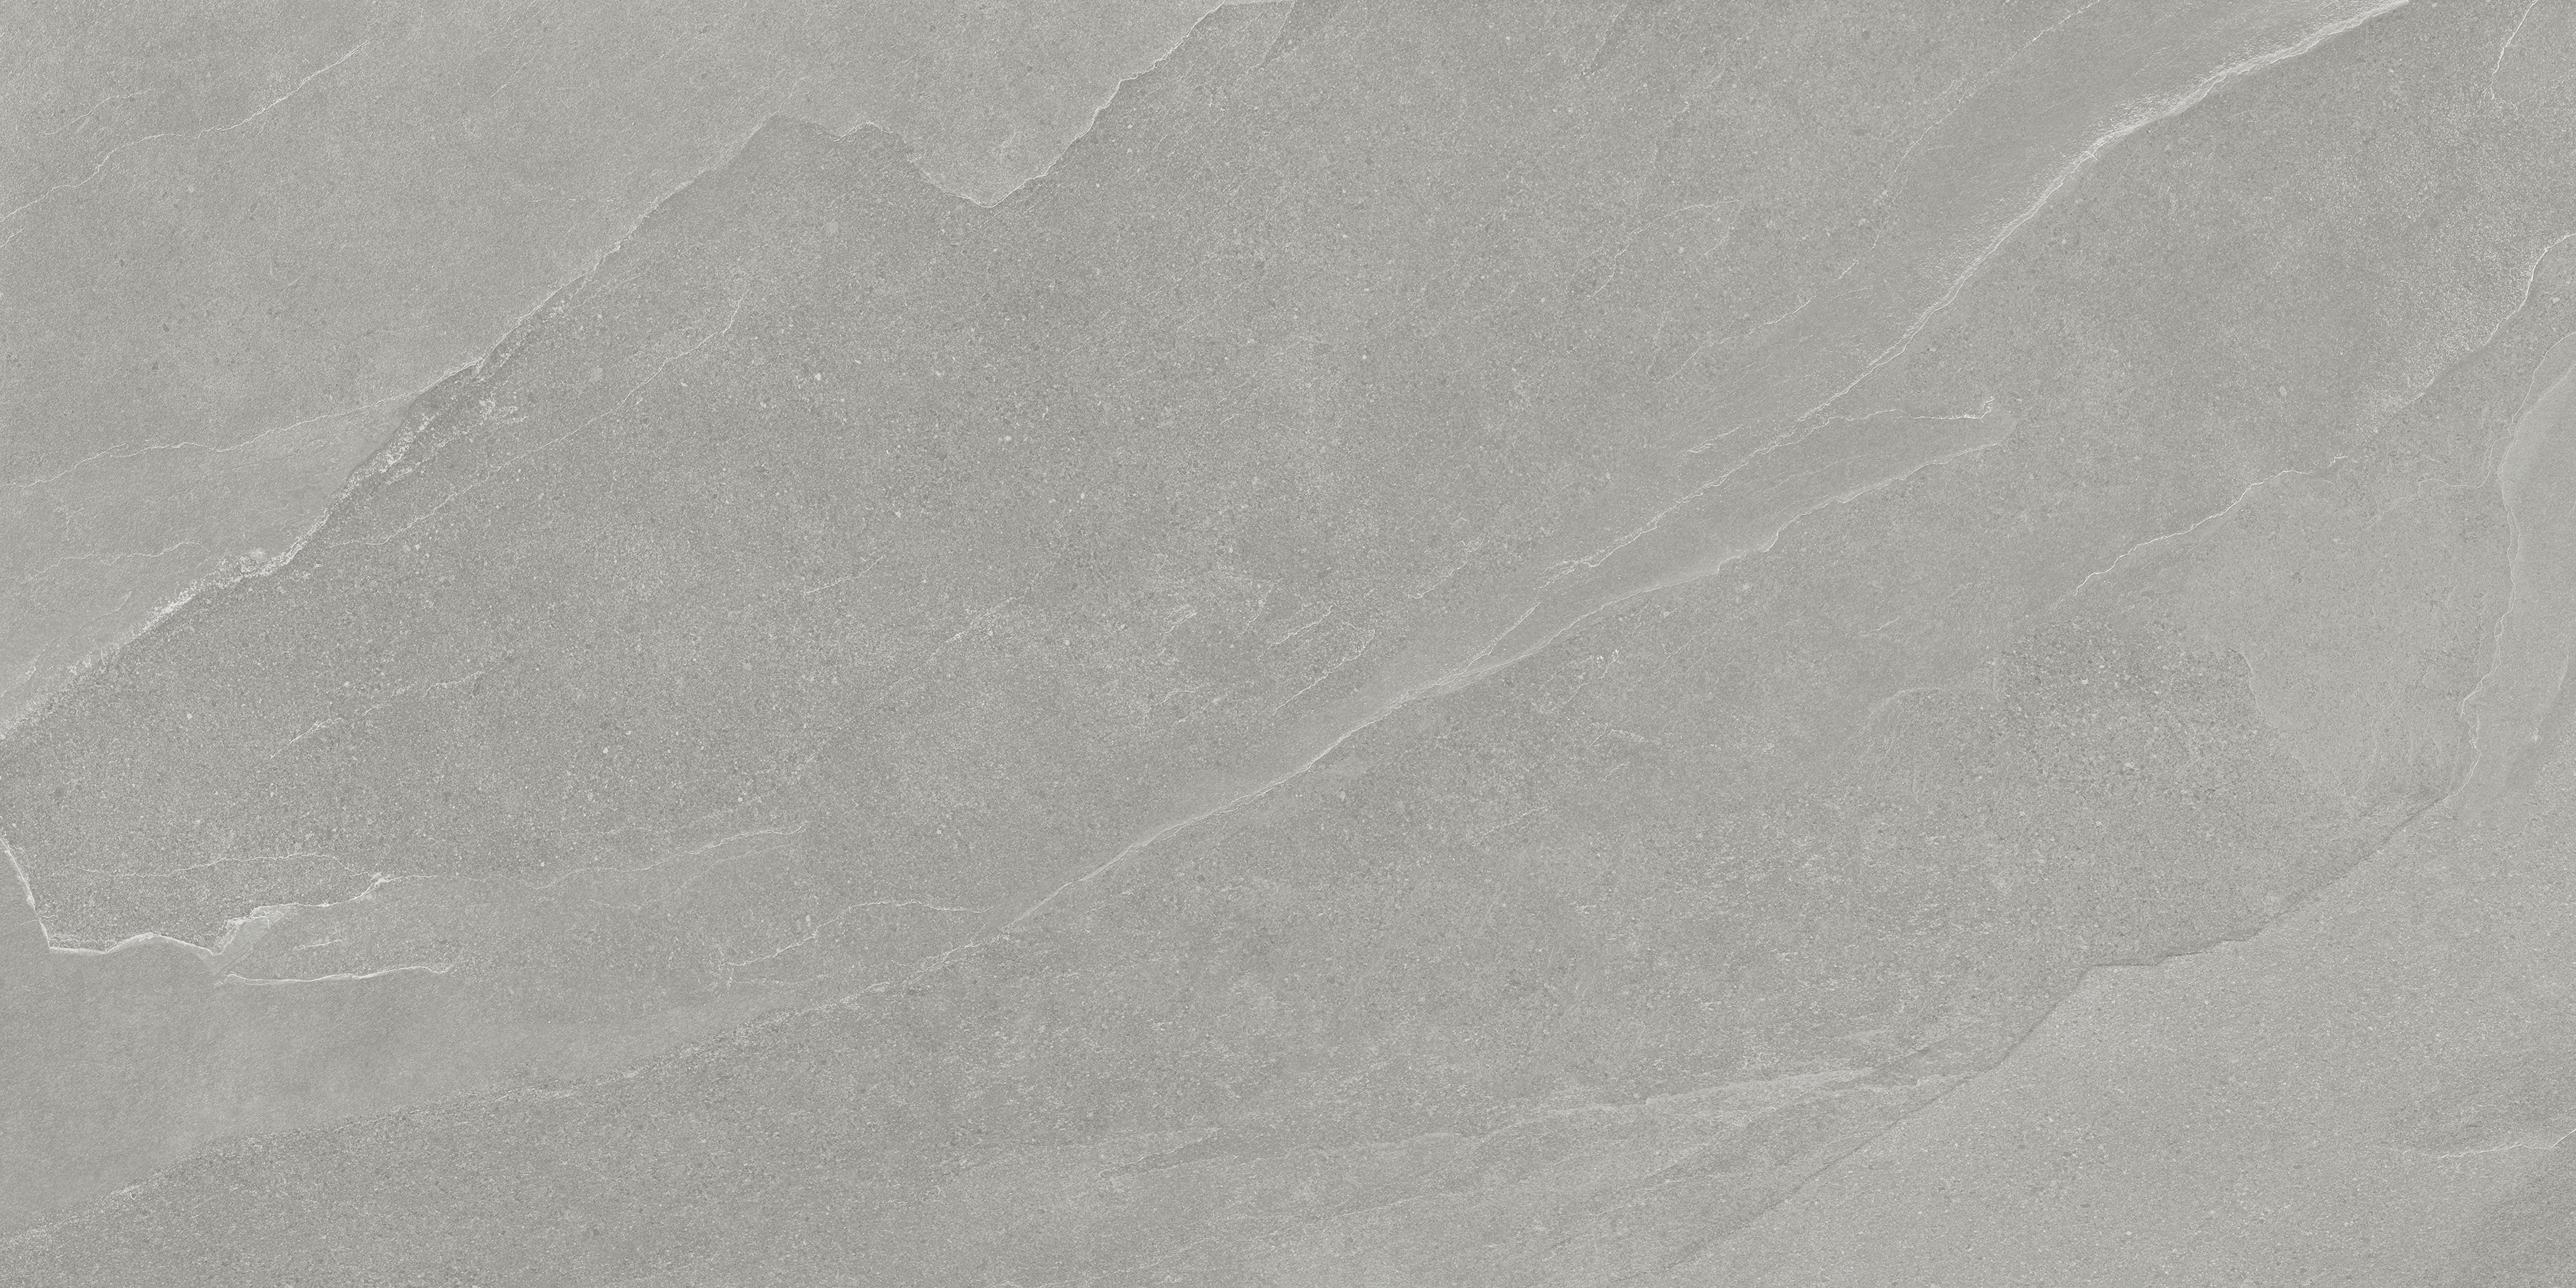 palladium pattern color body porcelain field tile from nord anatolia collection distributed by surface group international matte finish rectified edge 24x48 rectangle shape